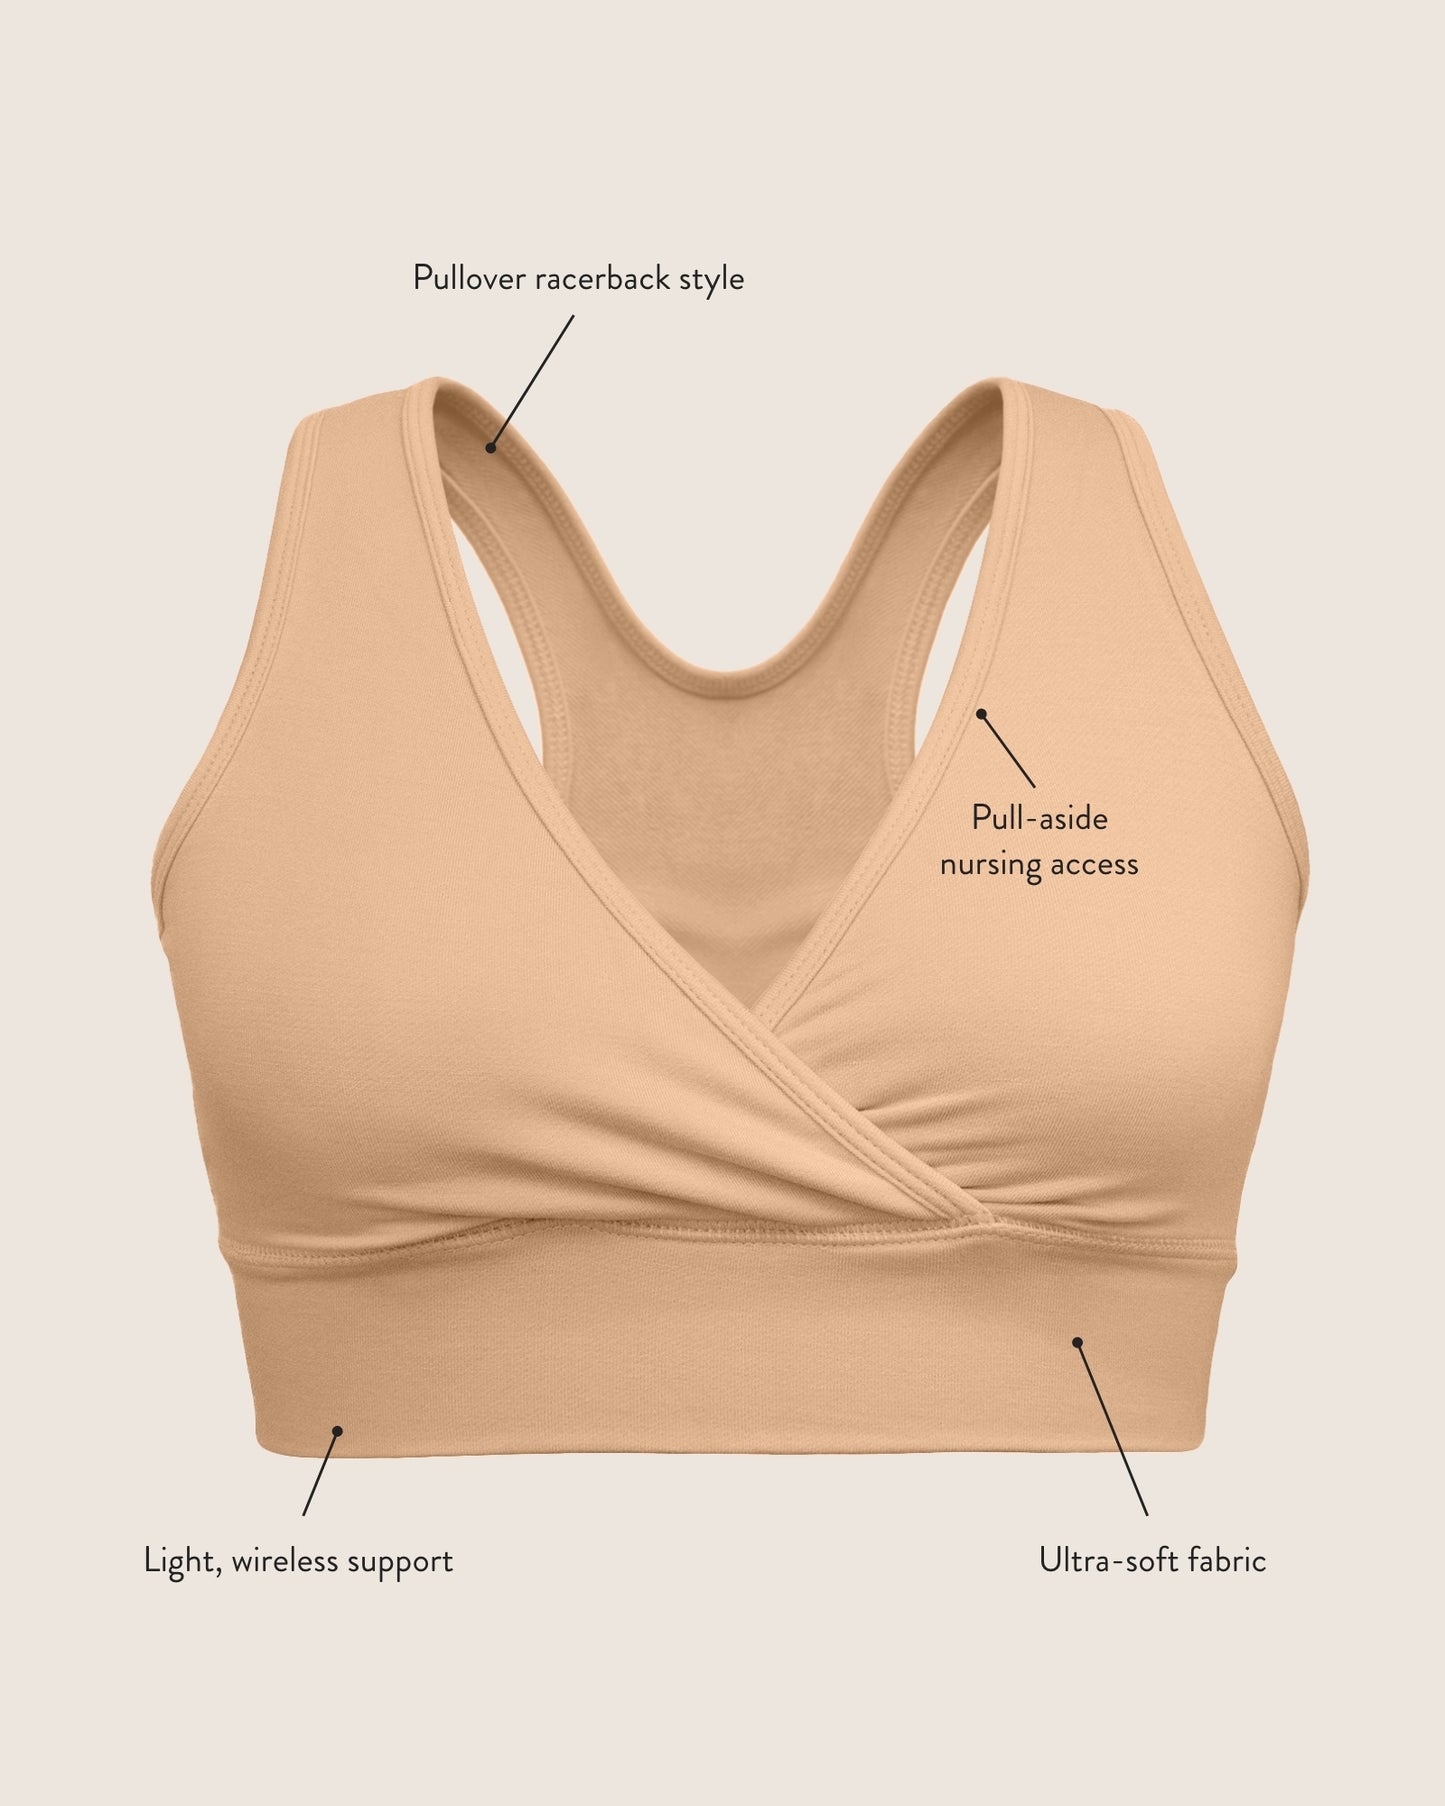 French Terry Racerback Nursing & Sleep Bra image with feature callouts